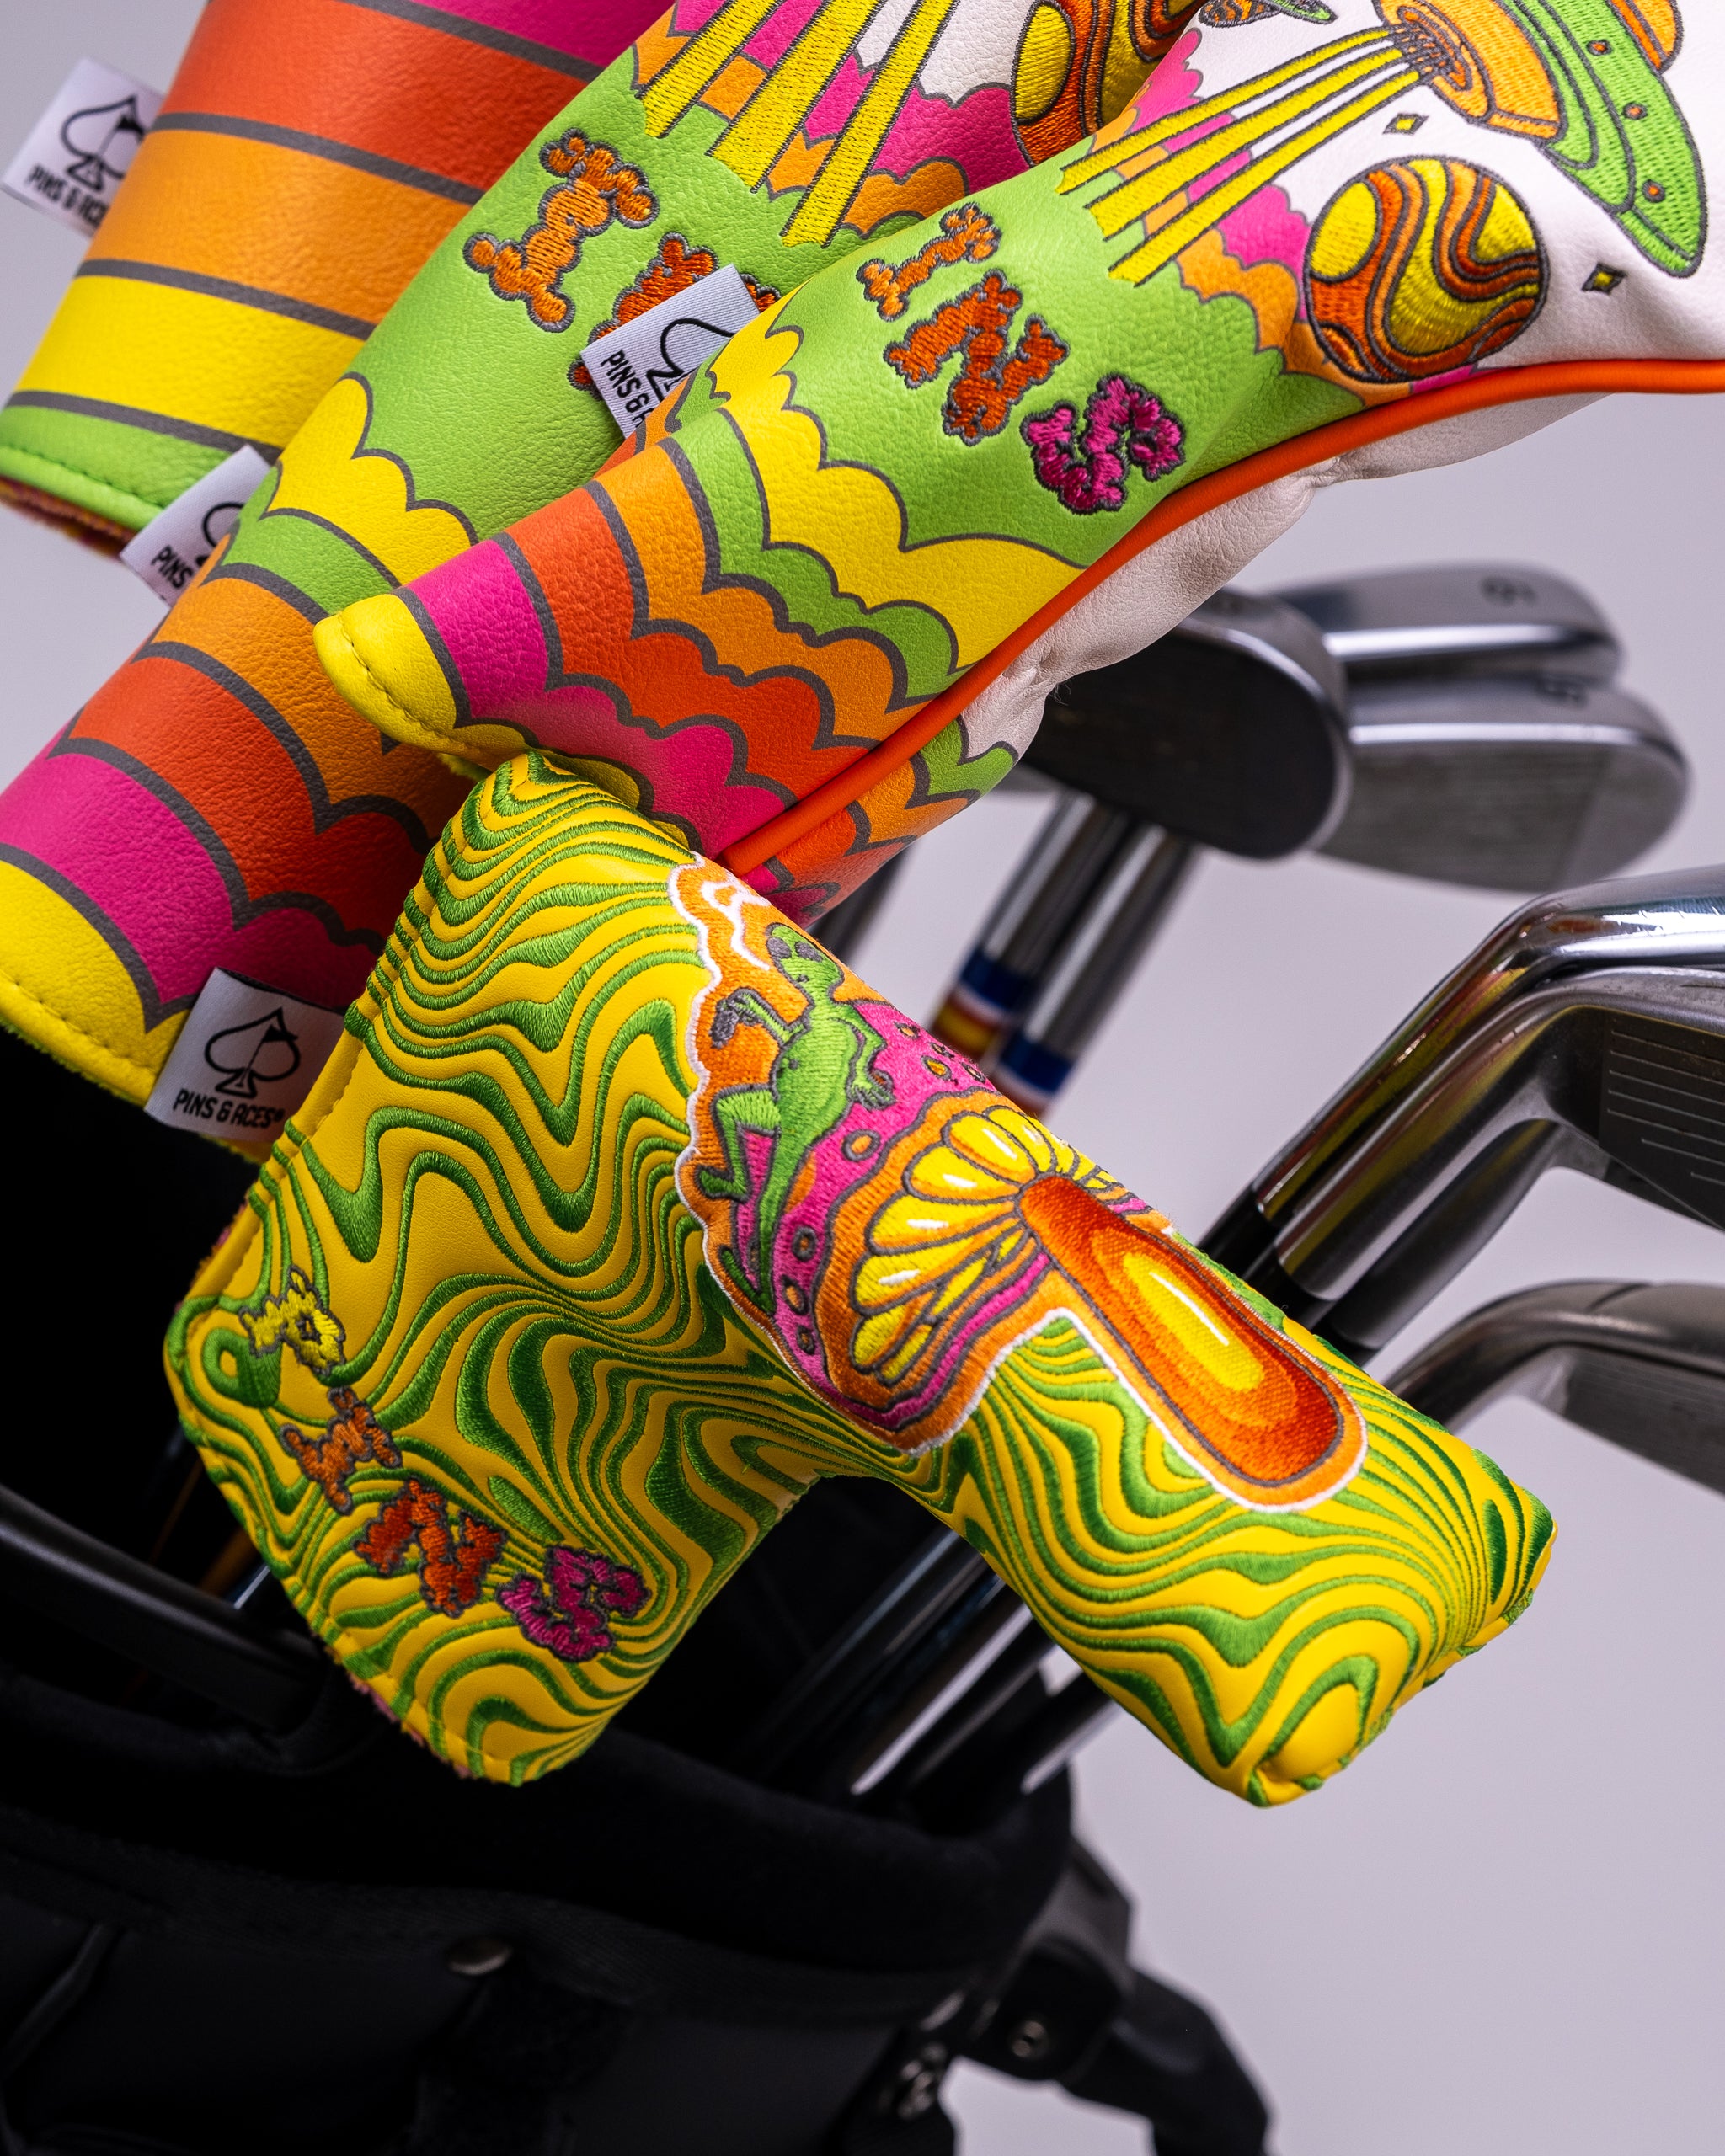 Cosmic Puff - Blade Putter Cover